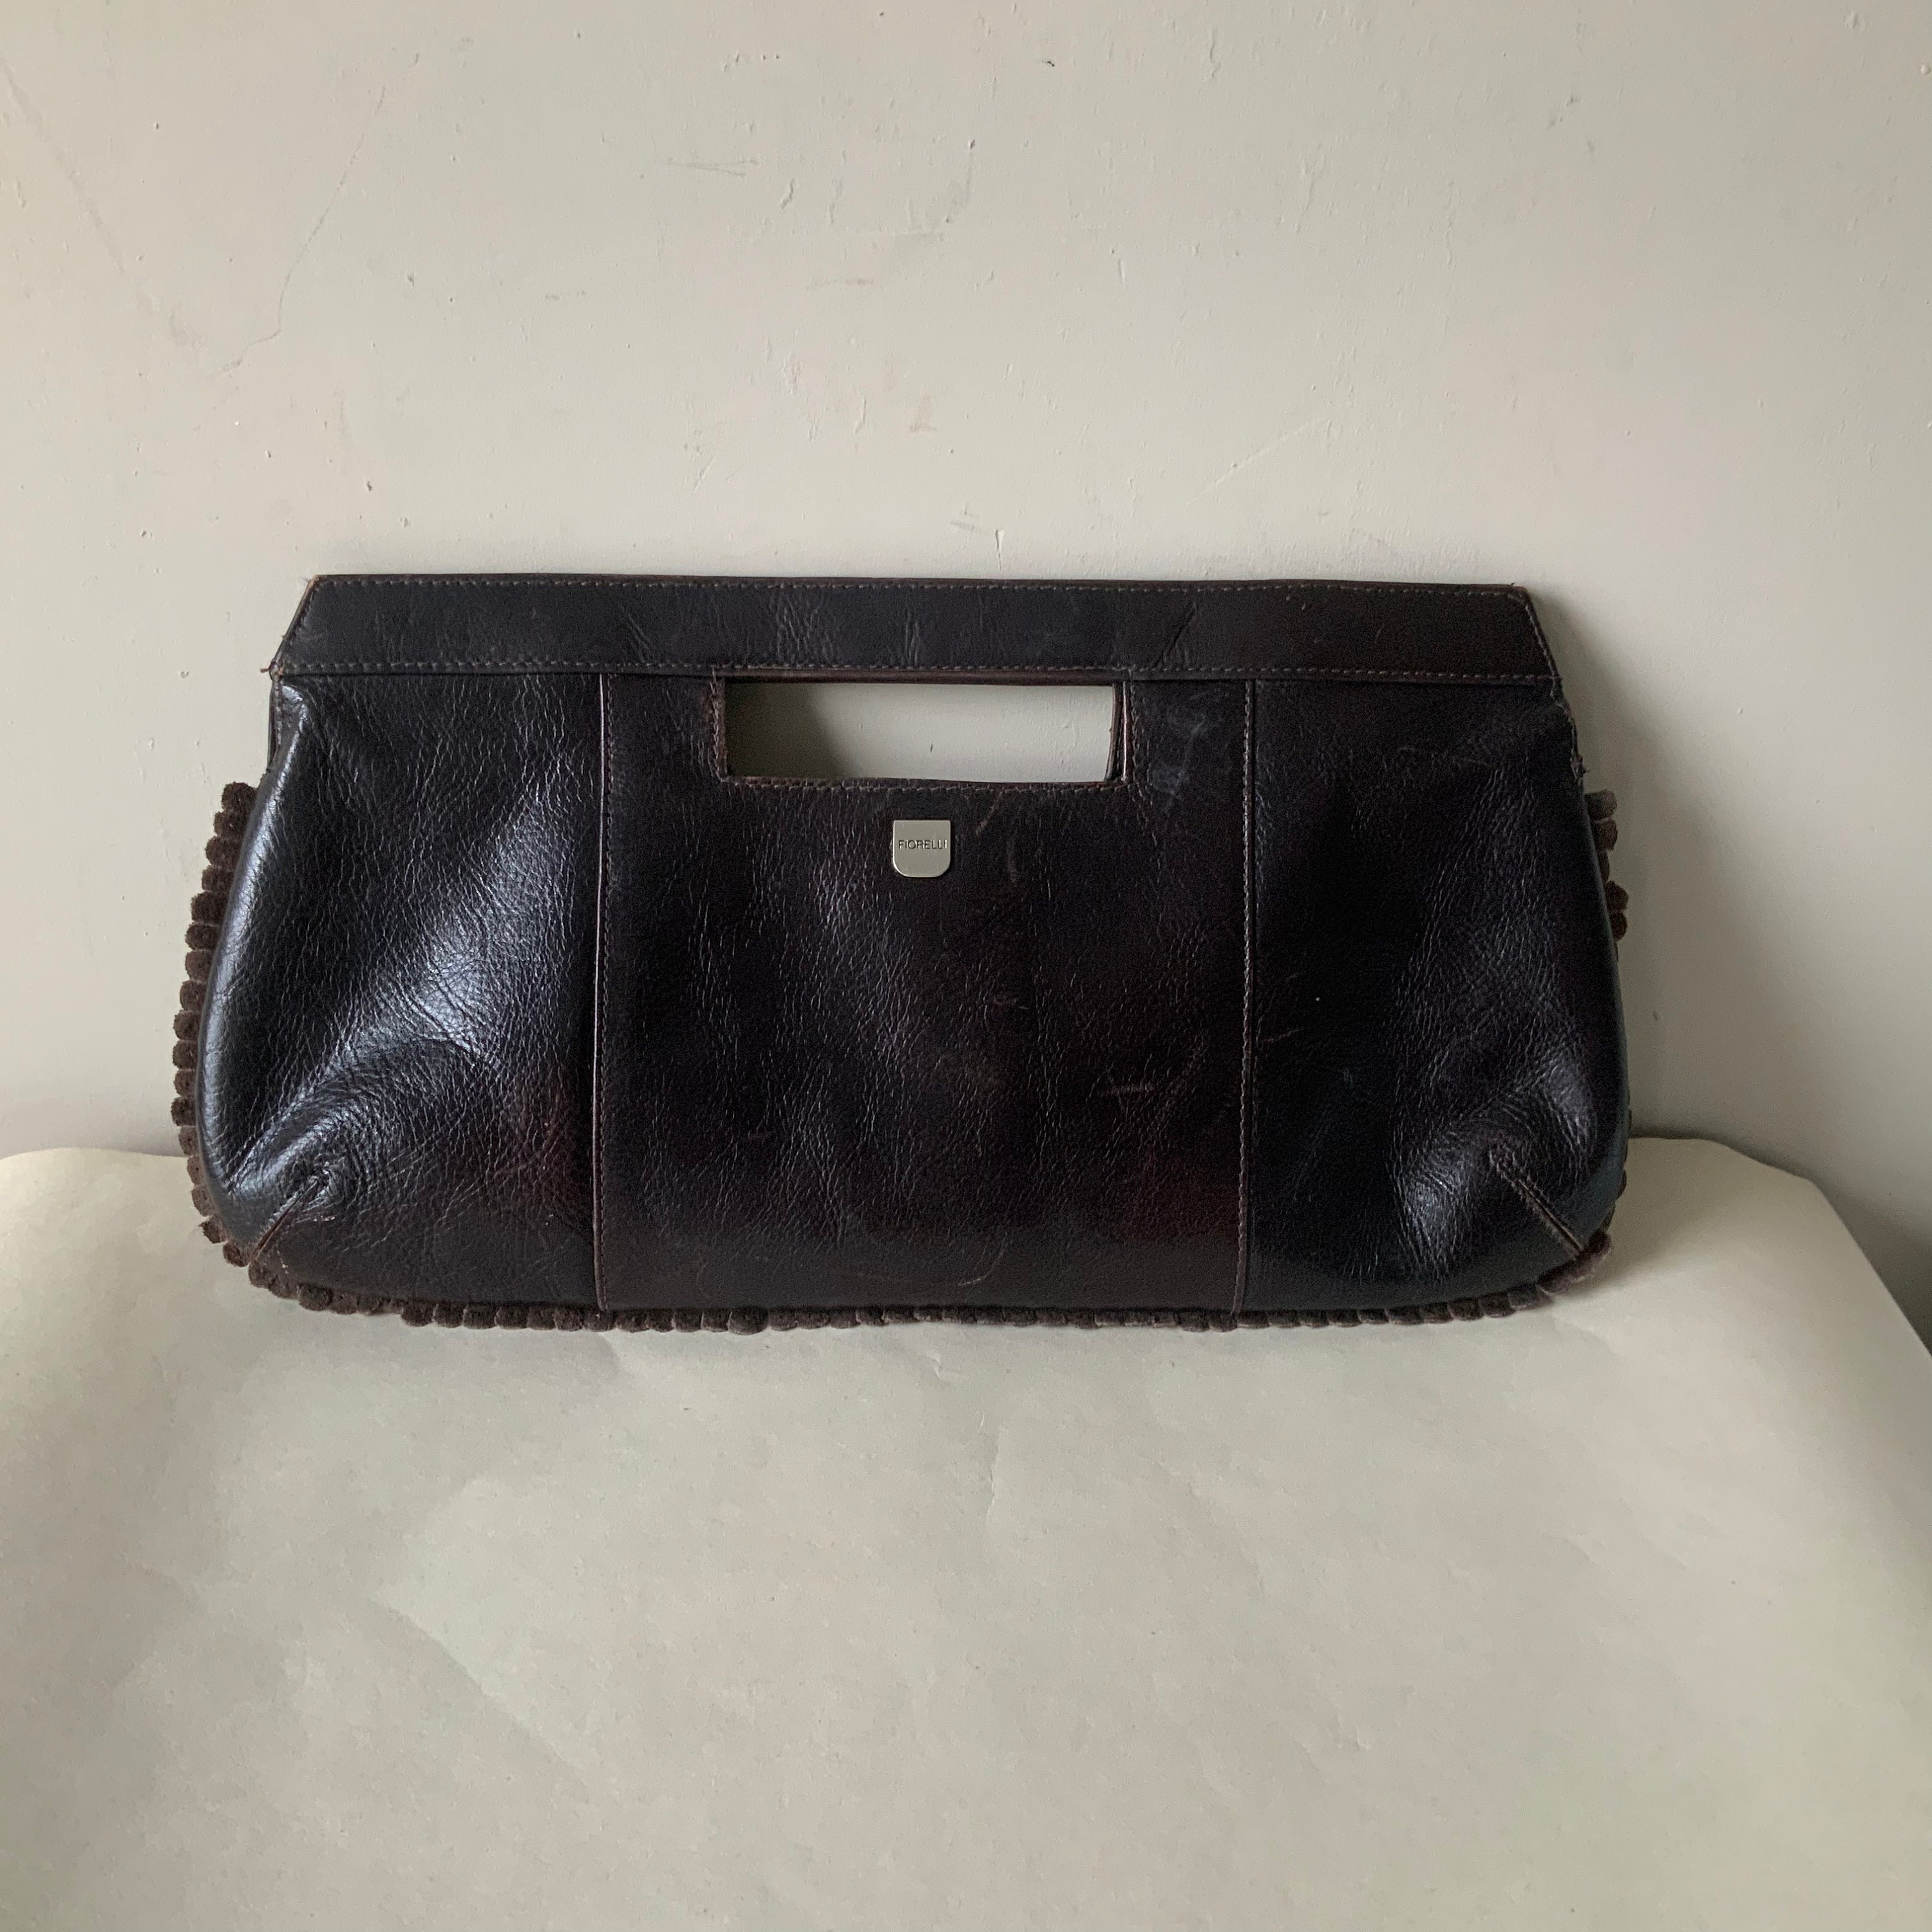 Stunning Vintage Givenchy Black Patent Leather Clutch Purse